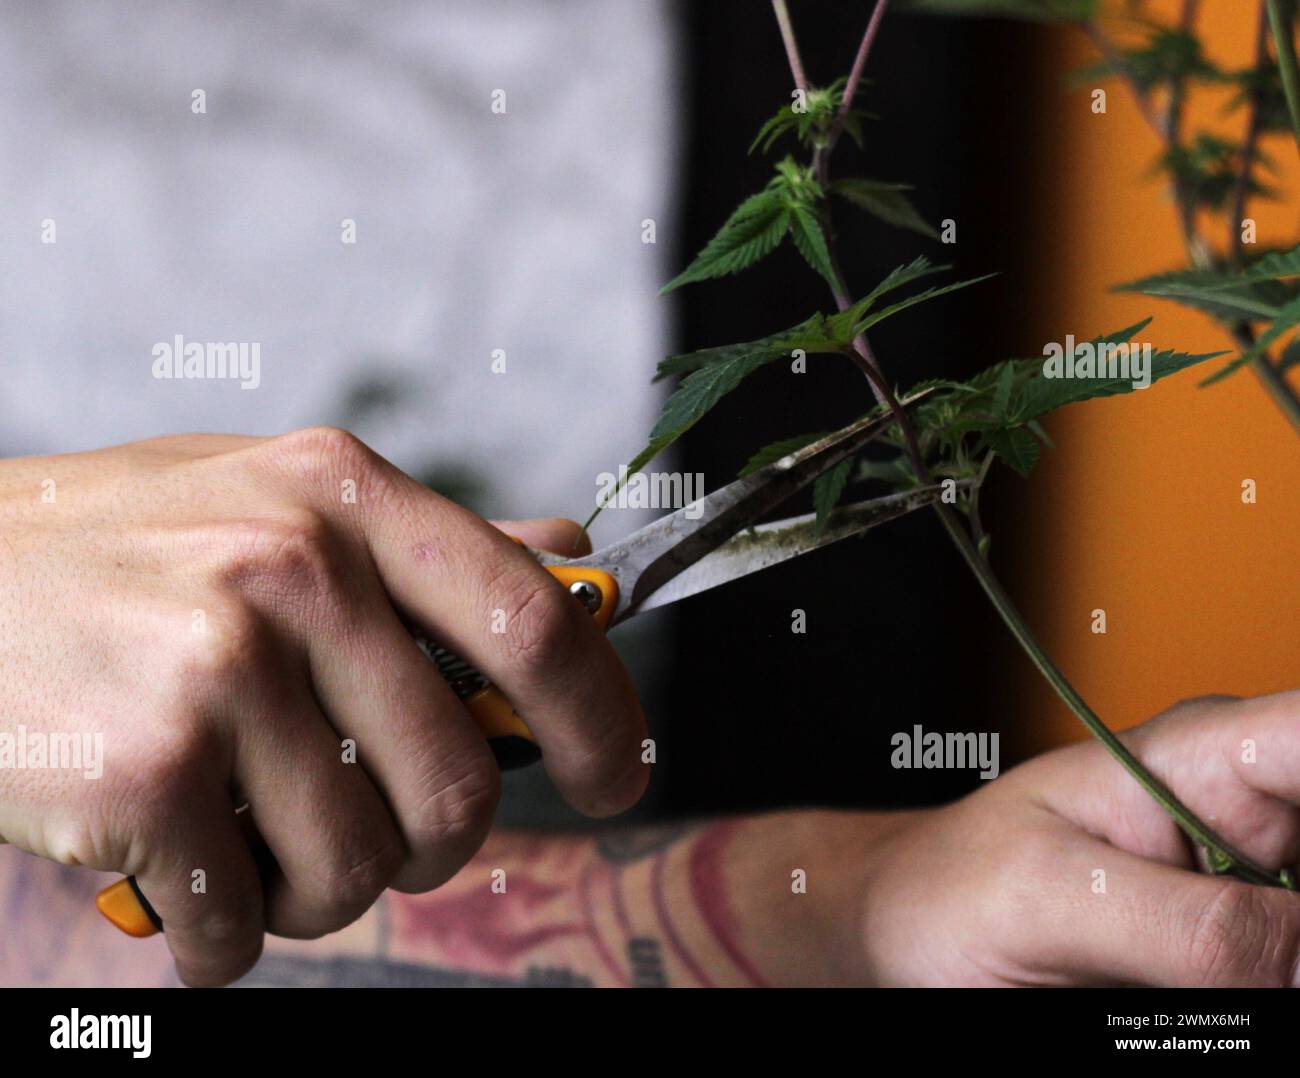 A close-up shot capturing hands delicately trimming a cannabis plant, showcasing the meticulous process of cultivation. The careful hands move with pr Stock Photo